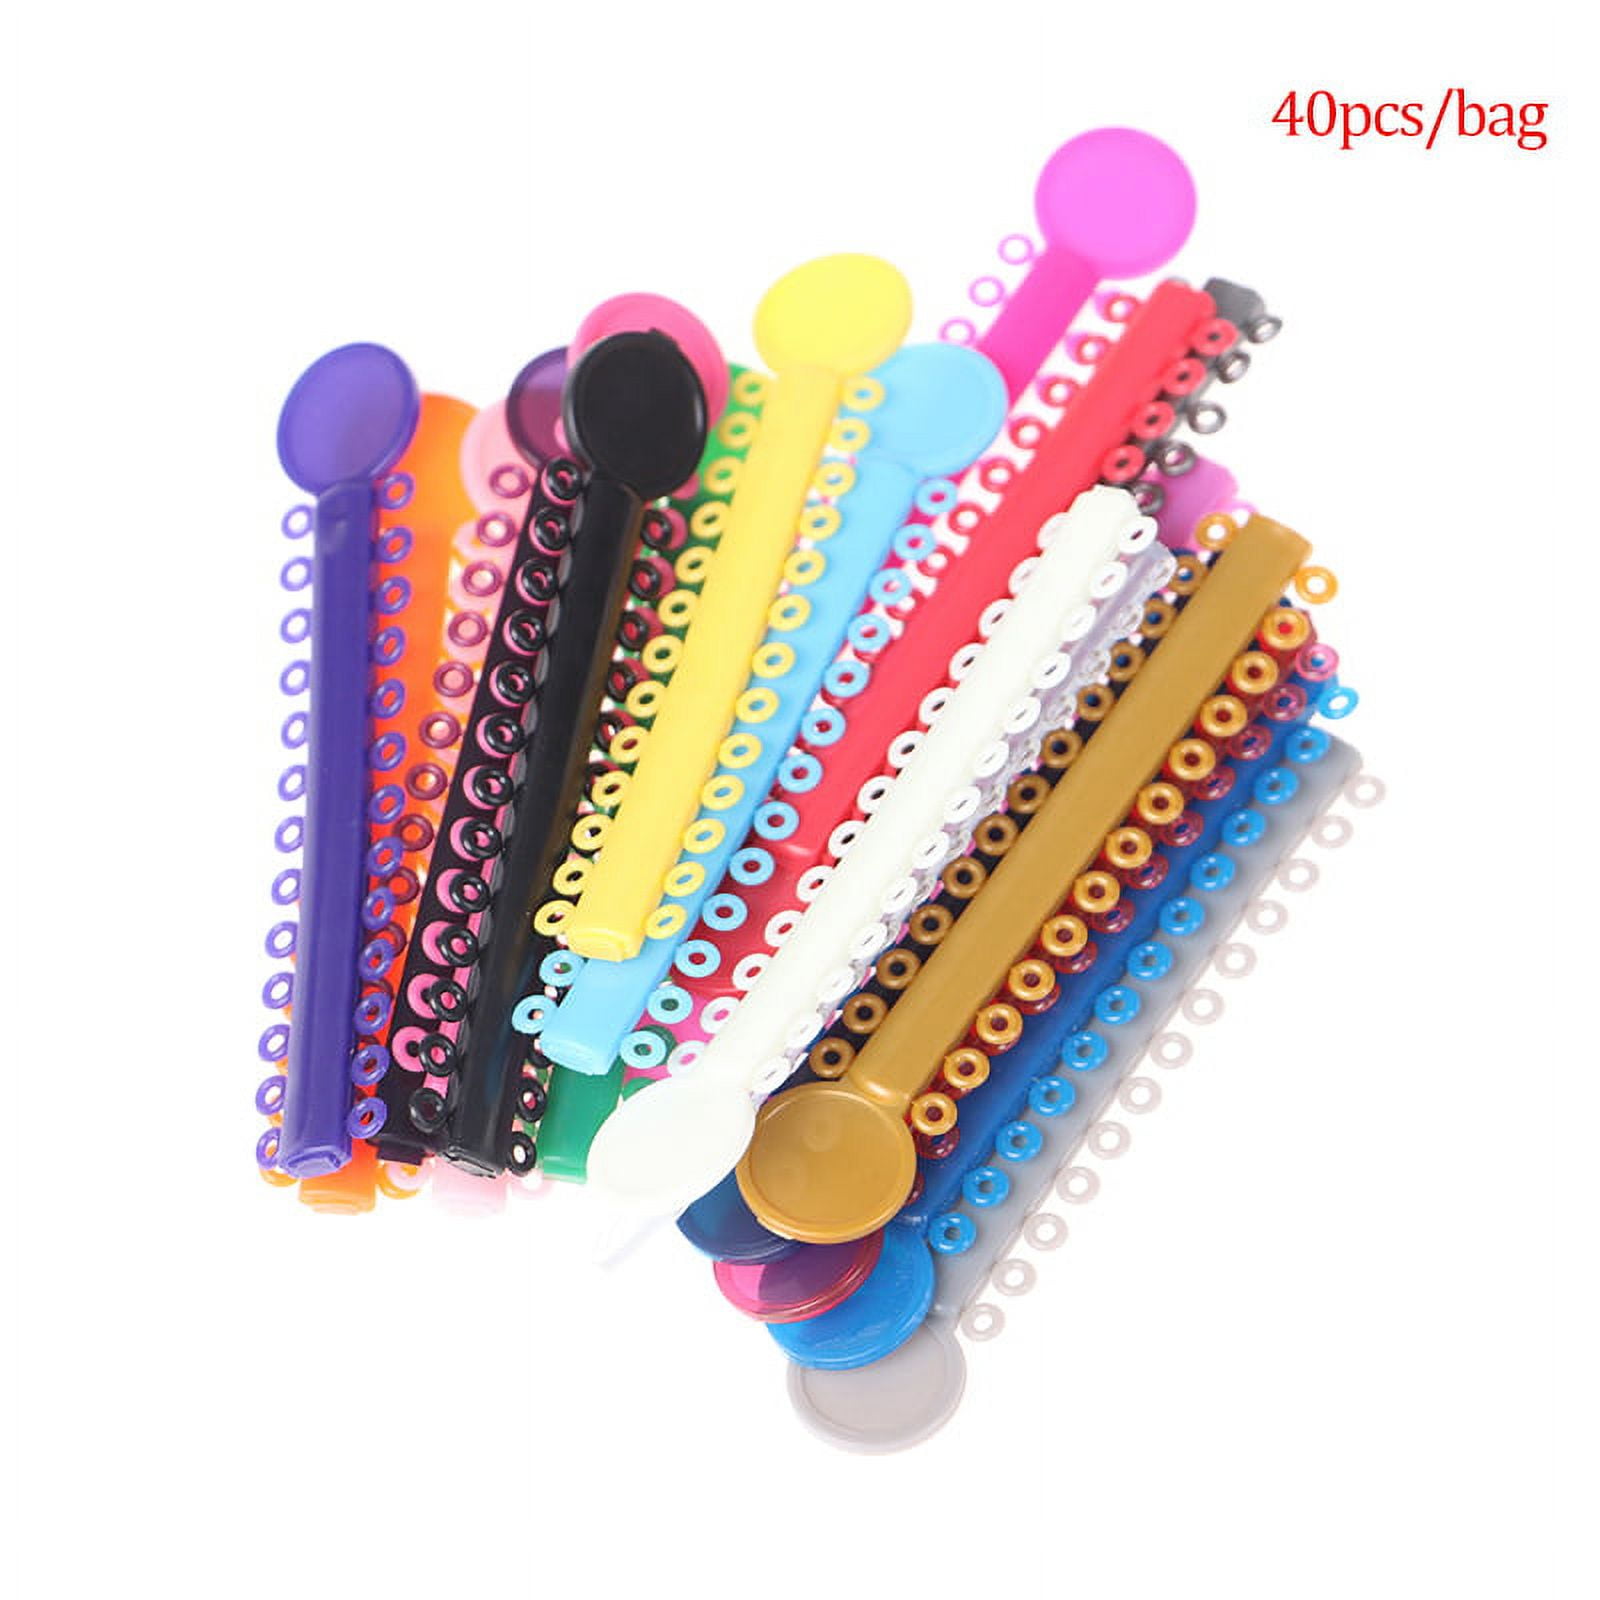 1040 Pcs Multicolored Braces Rubber Bands Orthodontic Ligature Ties O-Rings  Elastic Bands for Braces (Color)